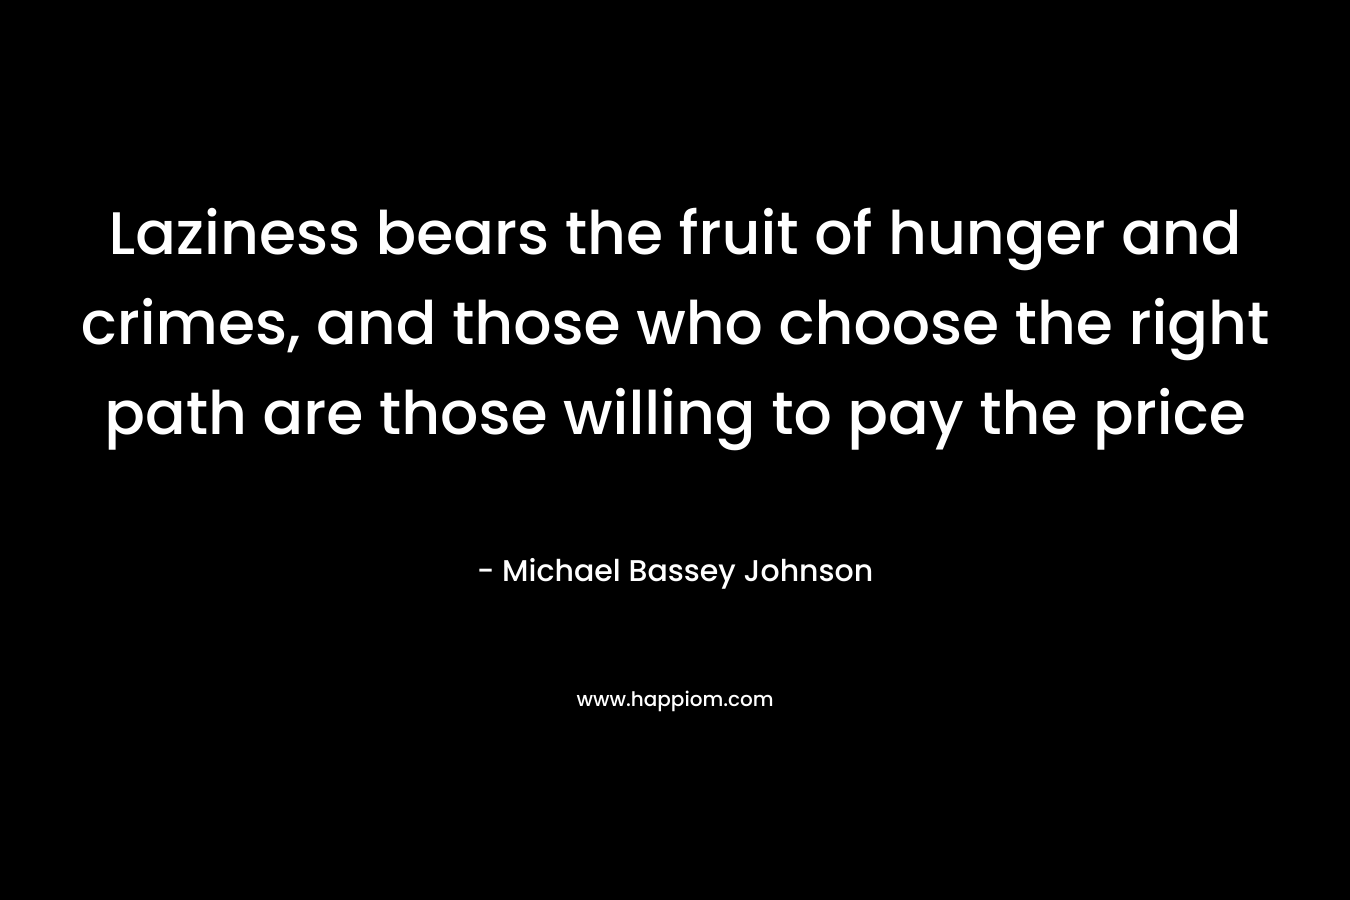 Laziness bears the fruit of hunger and crimes, and those who choose the right path are those willing to pay the price